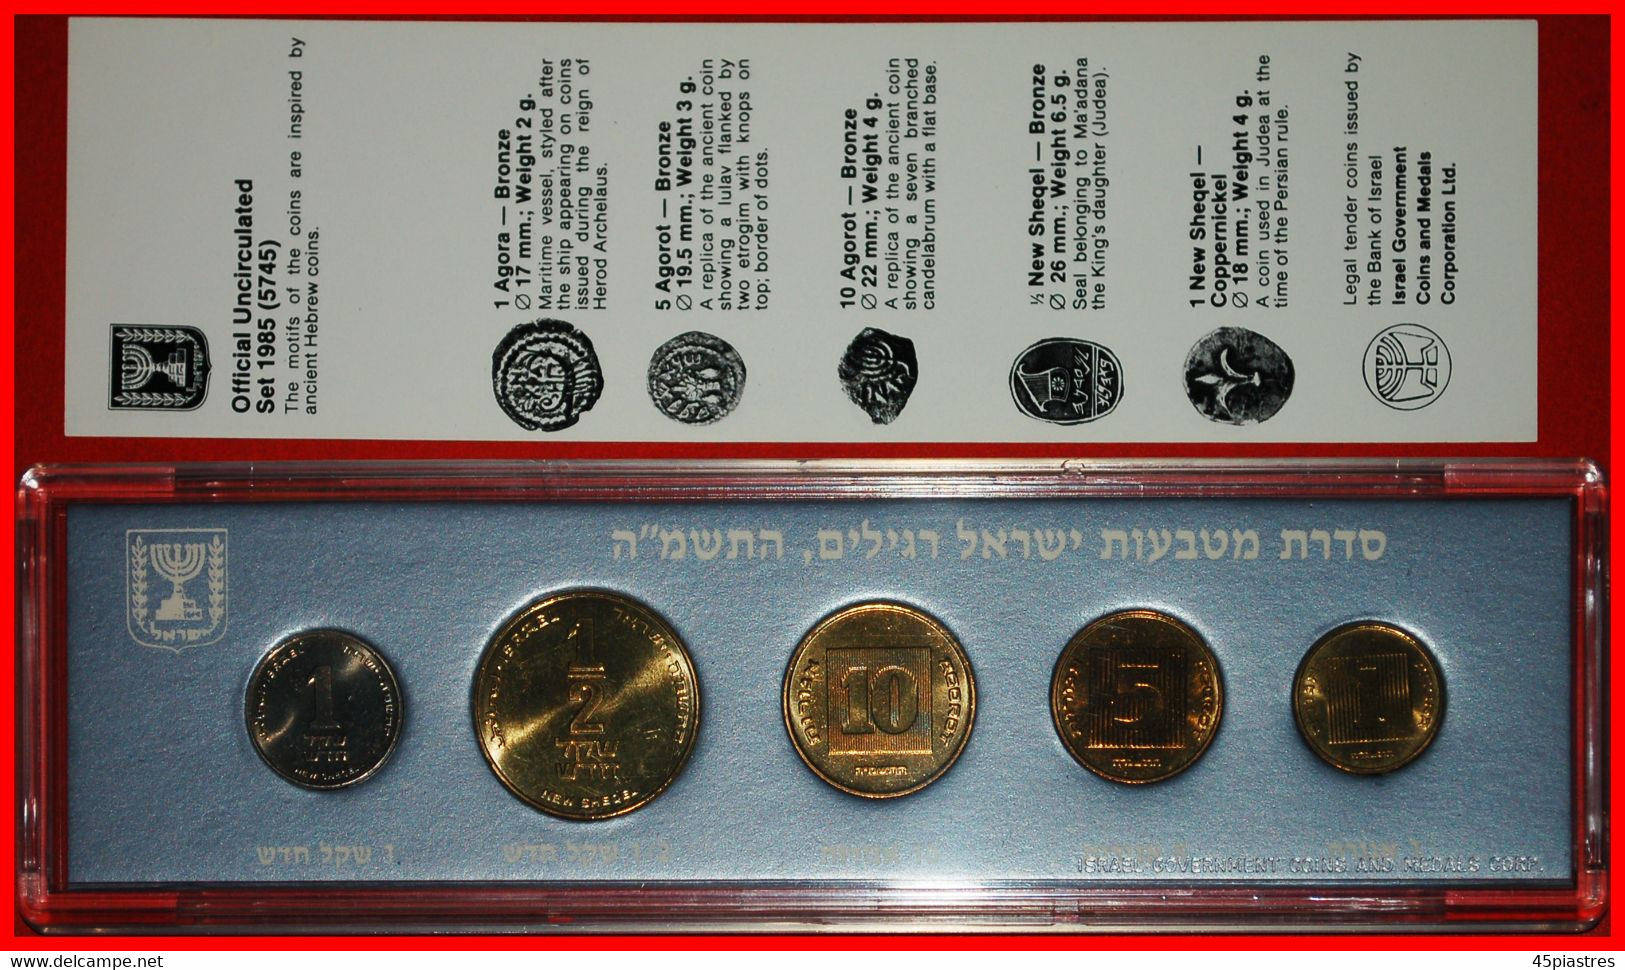 * FRANCE, SWITZERLAND, GERMANY: PALESTINE (israel) ★ OFFICIAL SET WITH 3 COUNTERFEITS 5745 (1985)★LOW START★ NO RESERVE! - Lots & Kiloware - Coins